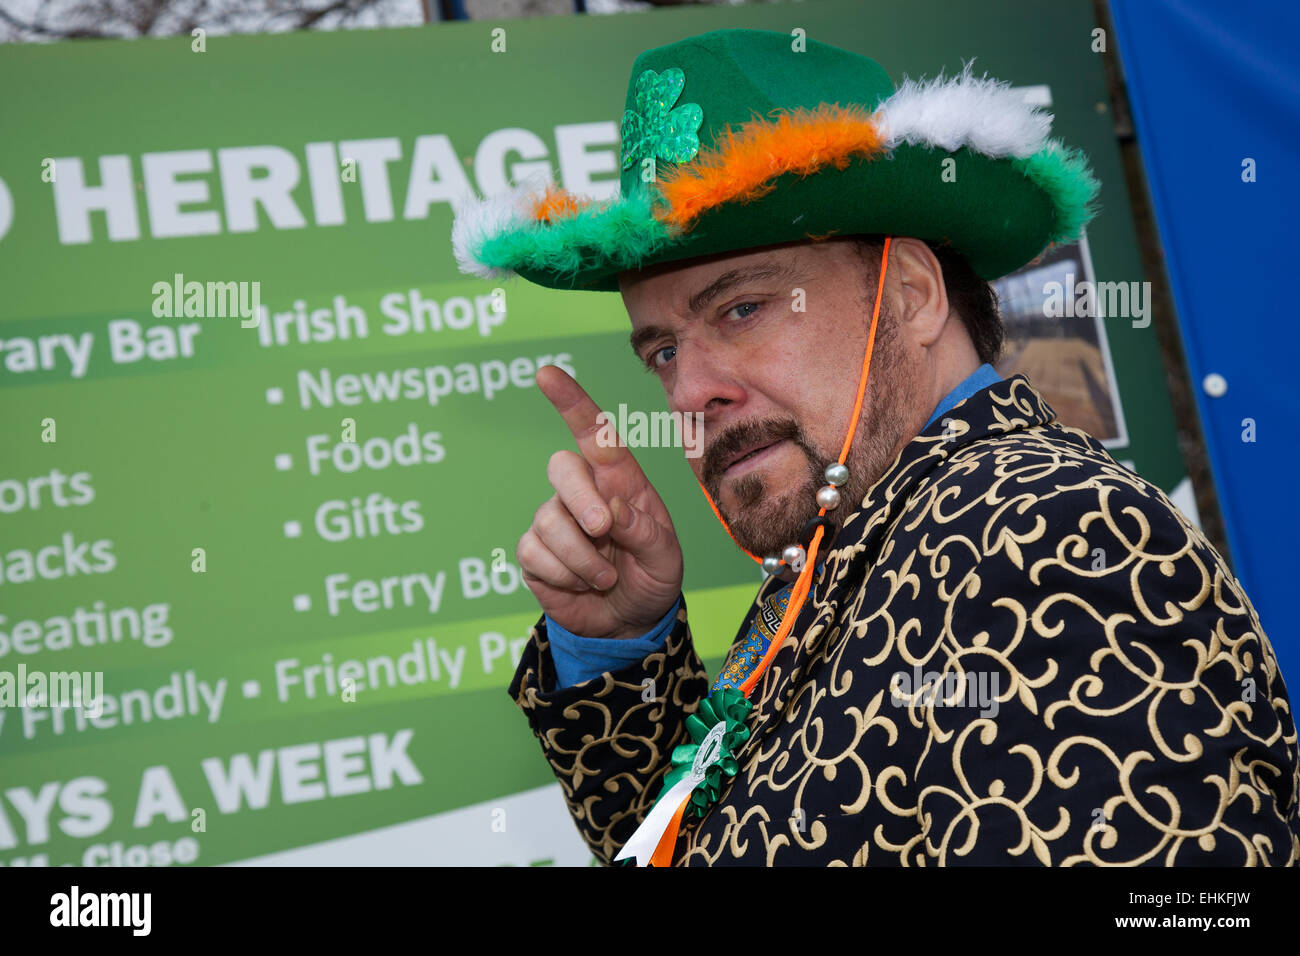 Manchester, UK 15th March, 2015.  Ryan Dior, Actor, TV Presenter at the St Patrick's weekend Irish Festival.  Thousands of people lined the streets to watch as the St Patrick’s Day parade made its way through Manchester.  The colourful procession set off from the Irish World Heritage Centre in Cheetham Hill before making its way to Albert Square.  Flag bearers representing the 32 counties in the Emerald Isle led the parade into the city centre, followed by floats from the city’s Irish associations. Stock Photo